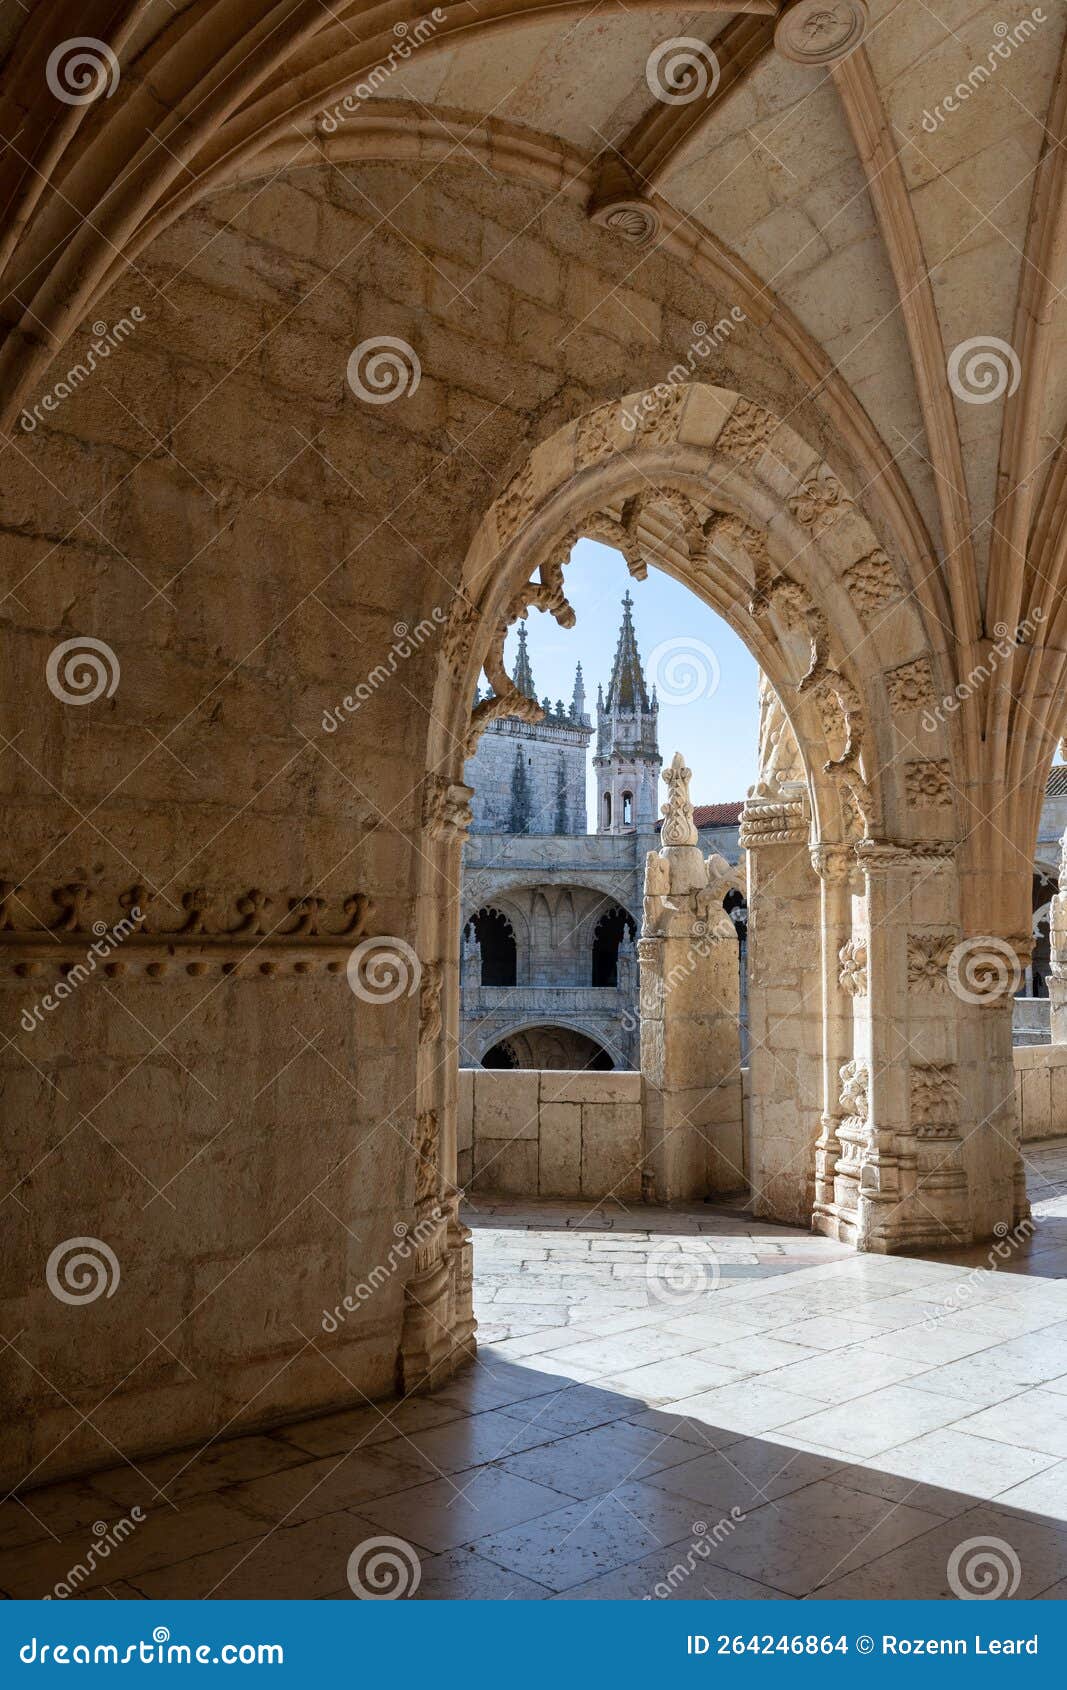 arches of jeronimos monastery gallery, belem, lisbon, portugal